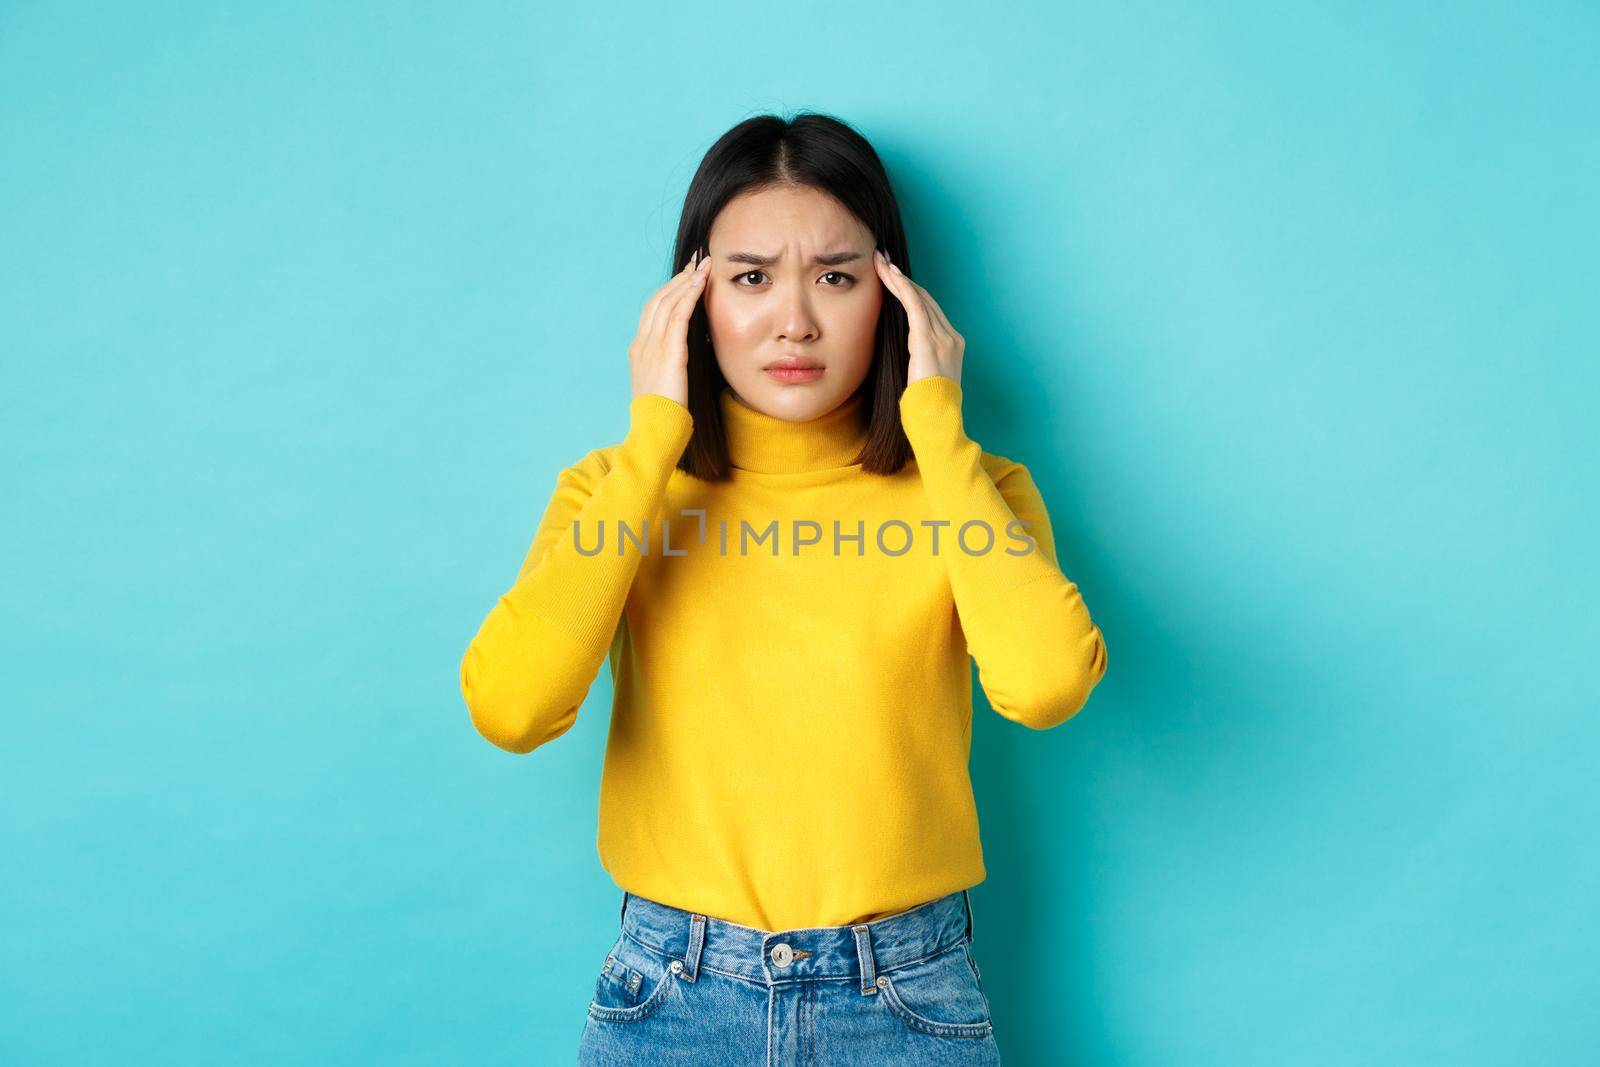 Image of distressed asian woman touching head and frowning, feeling headache, standing troubled against blue background.